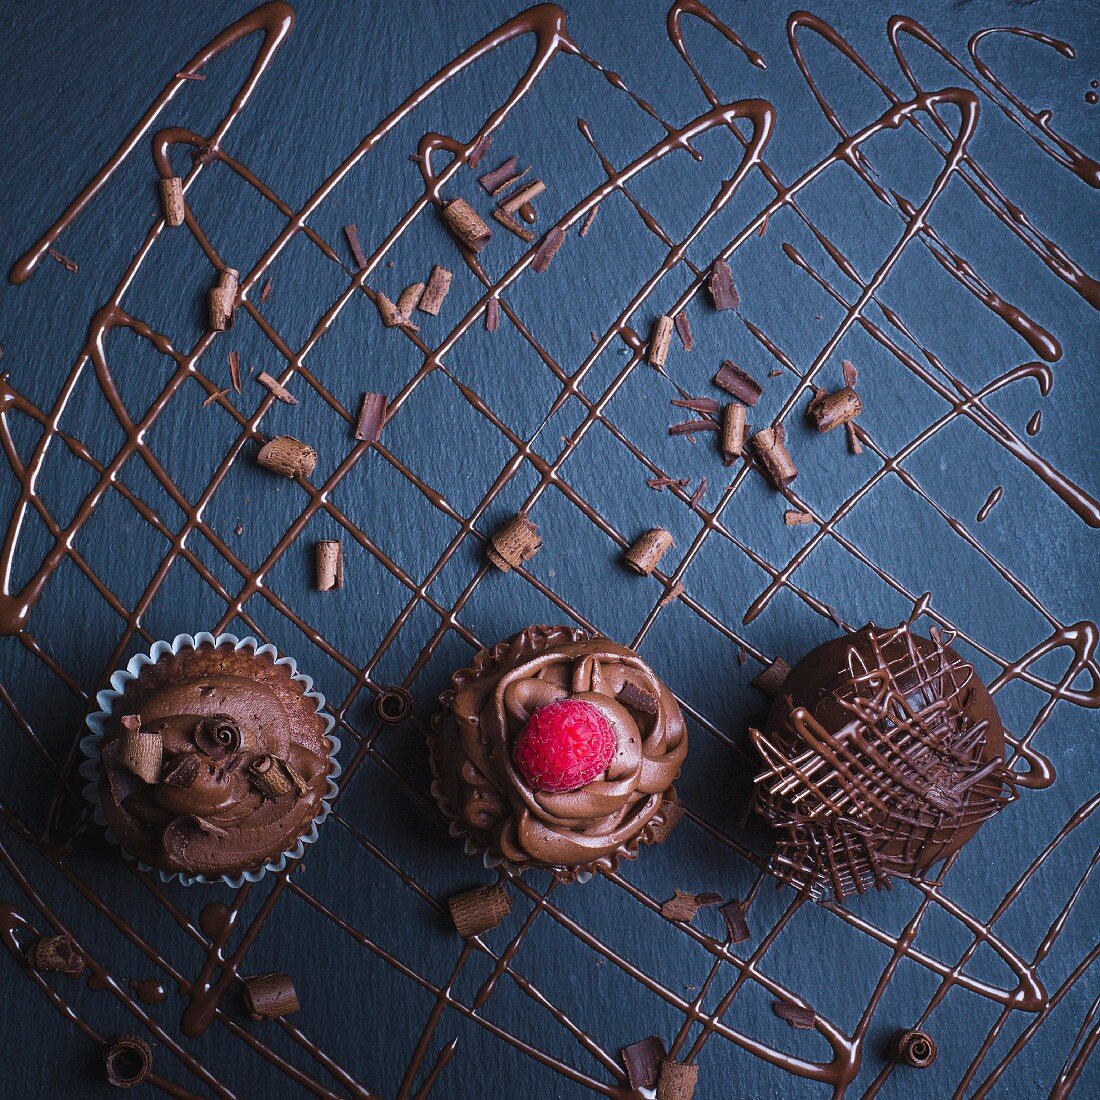 Decadent chocolate cupcakes with chocolate icing, shavings of chocolate and a raspberry